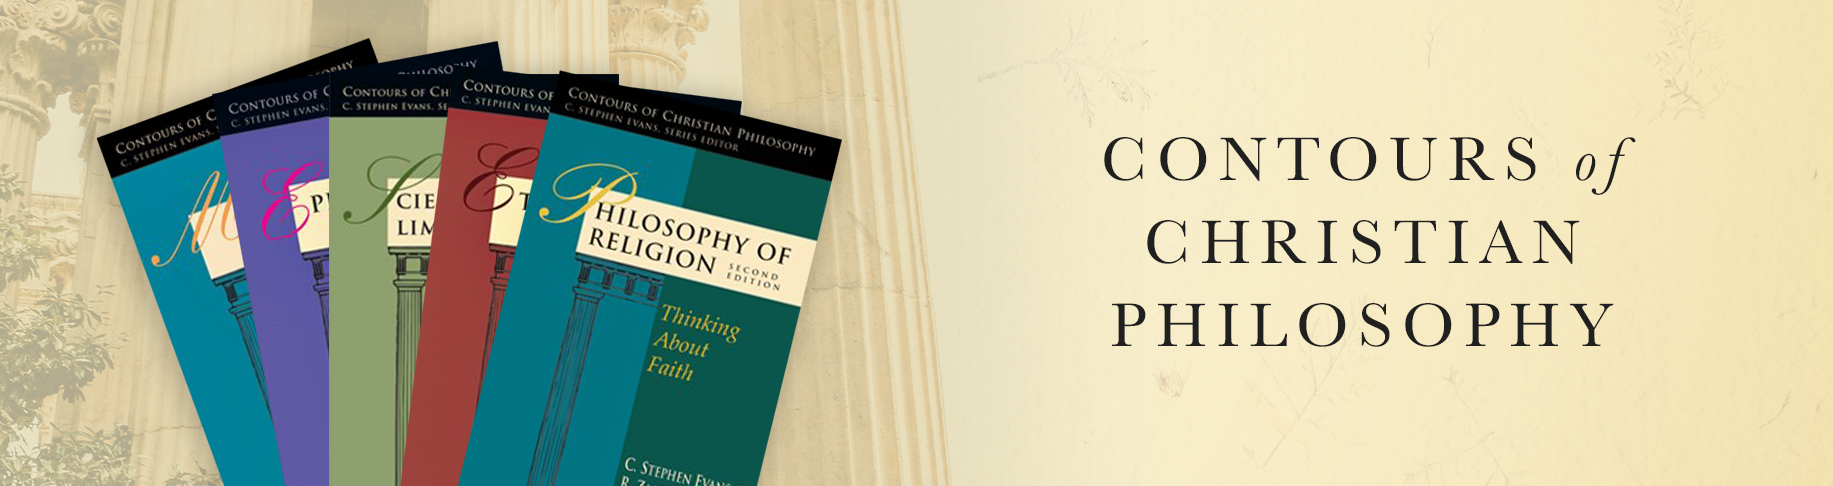 Contours of Christian Philosophy